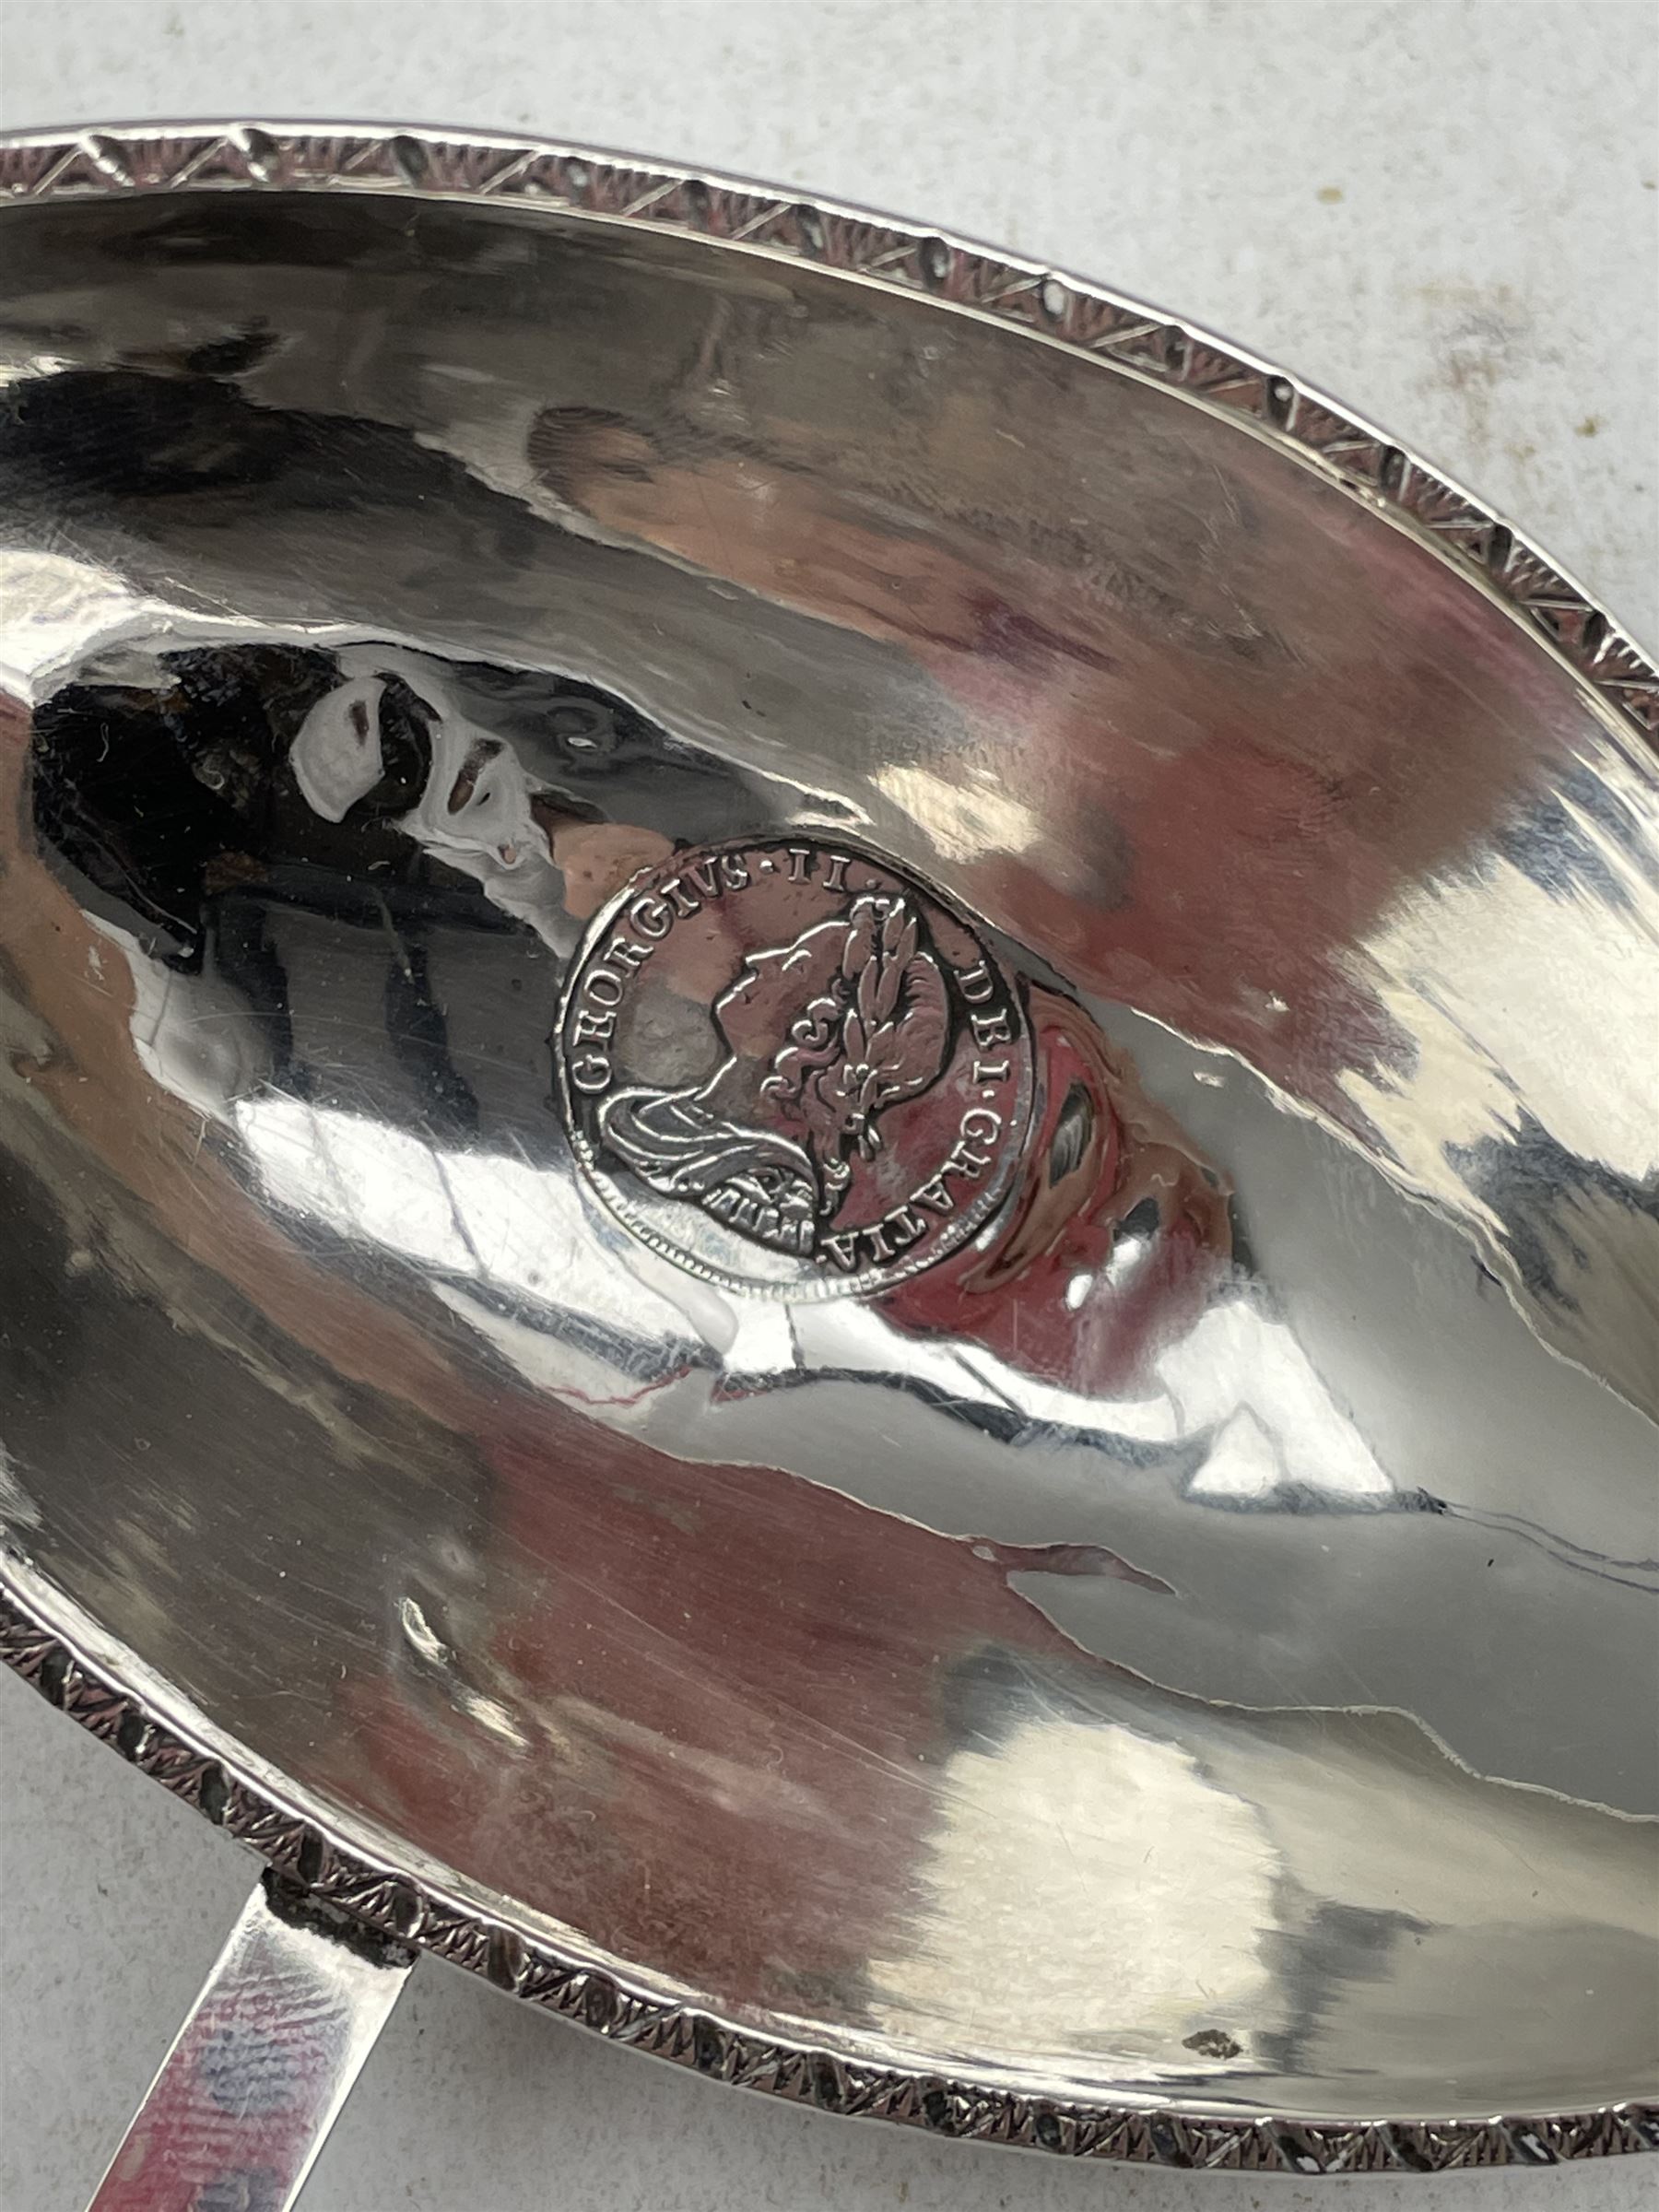 Georgian silver punch ladle with oval bowl inset with a George II maundy threepence coin 1746 on twi - Image 2 of 3